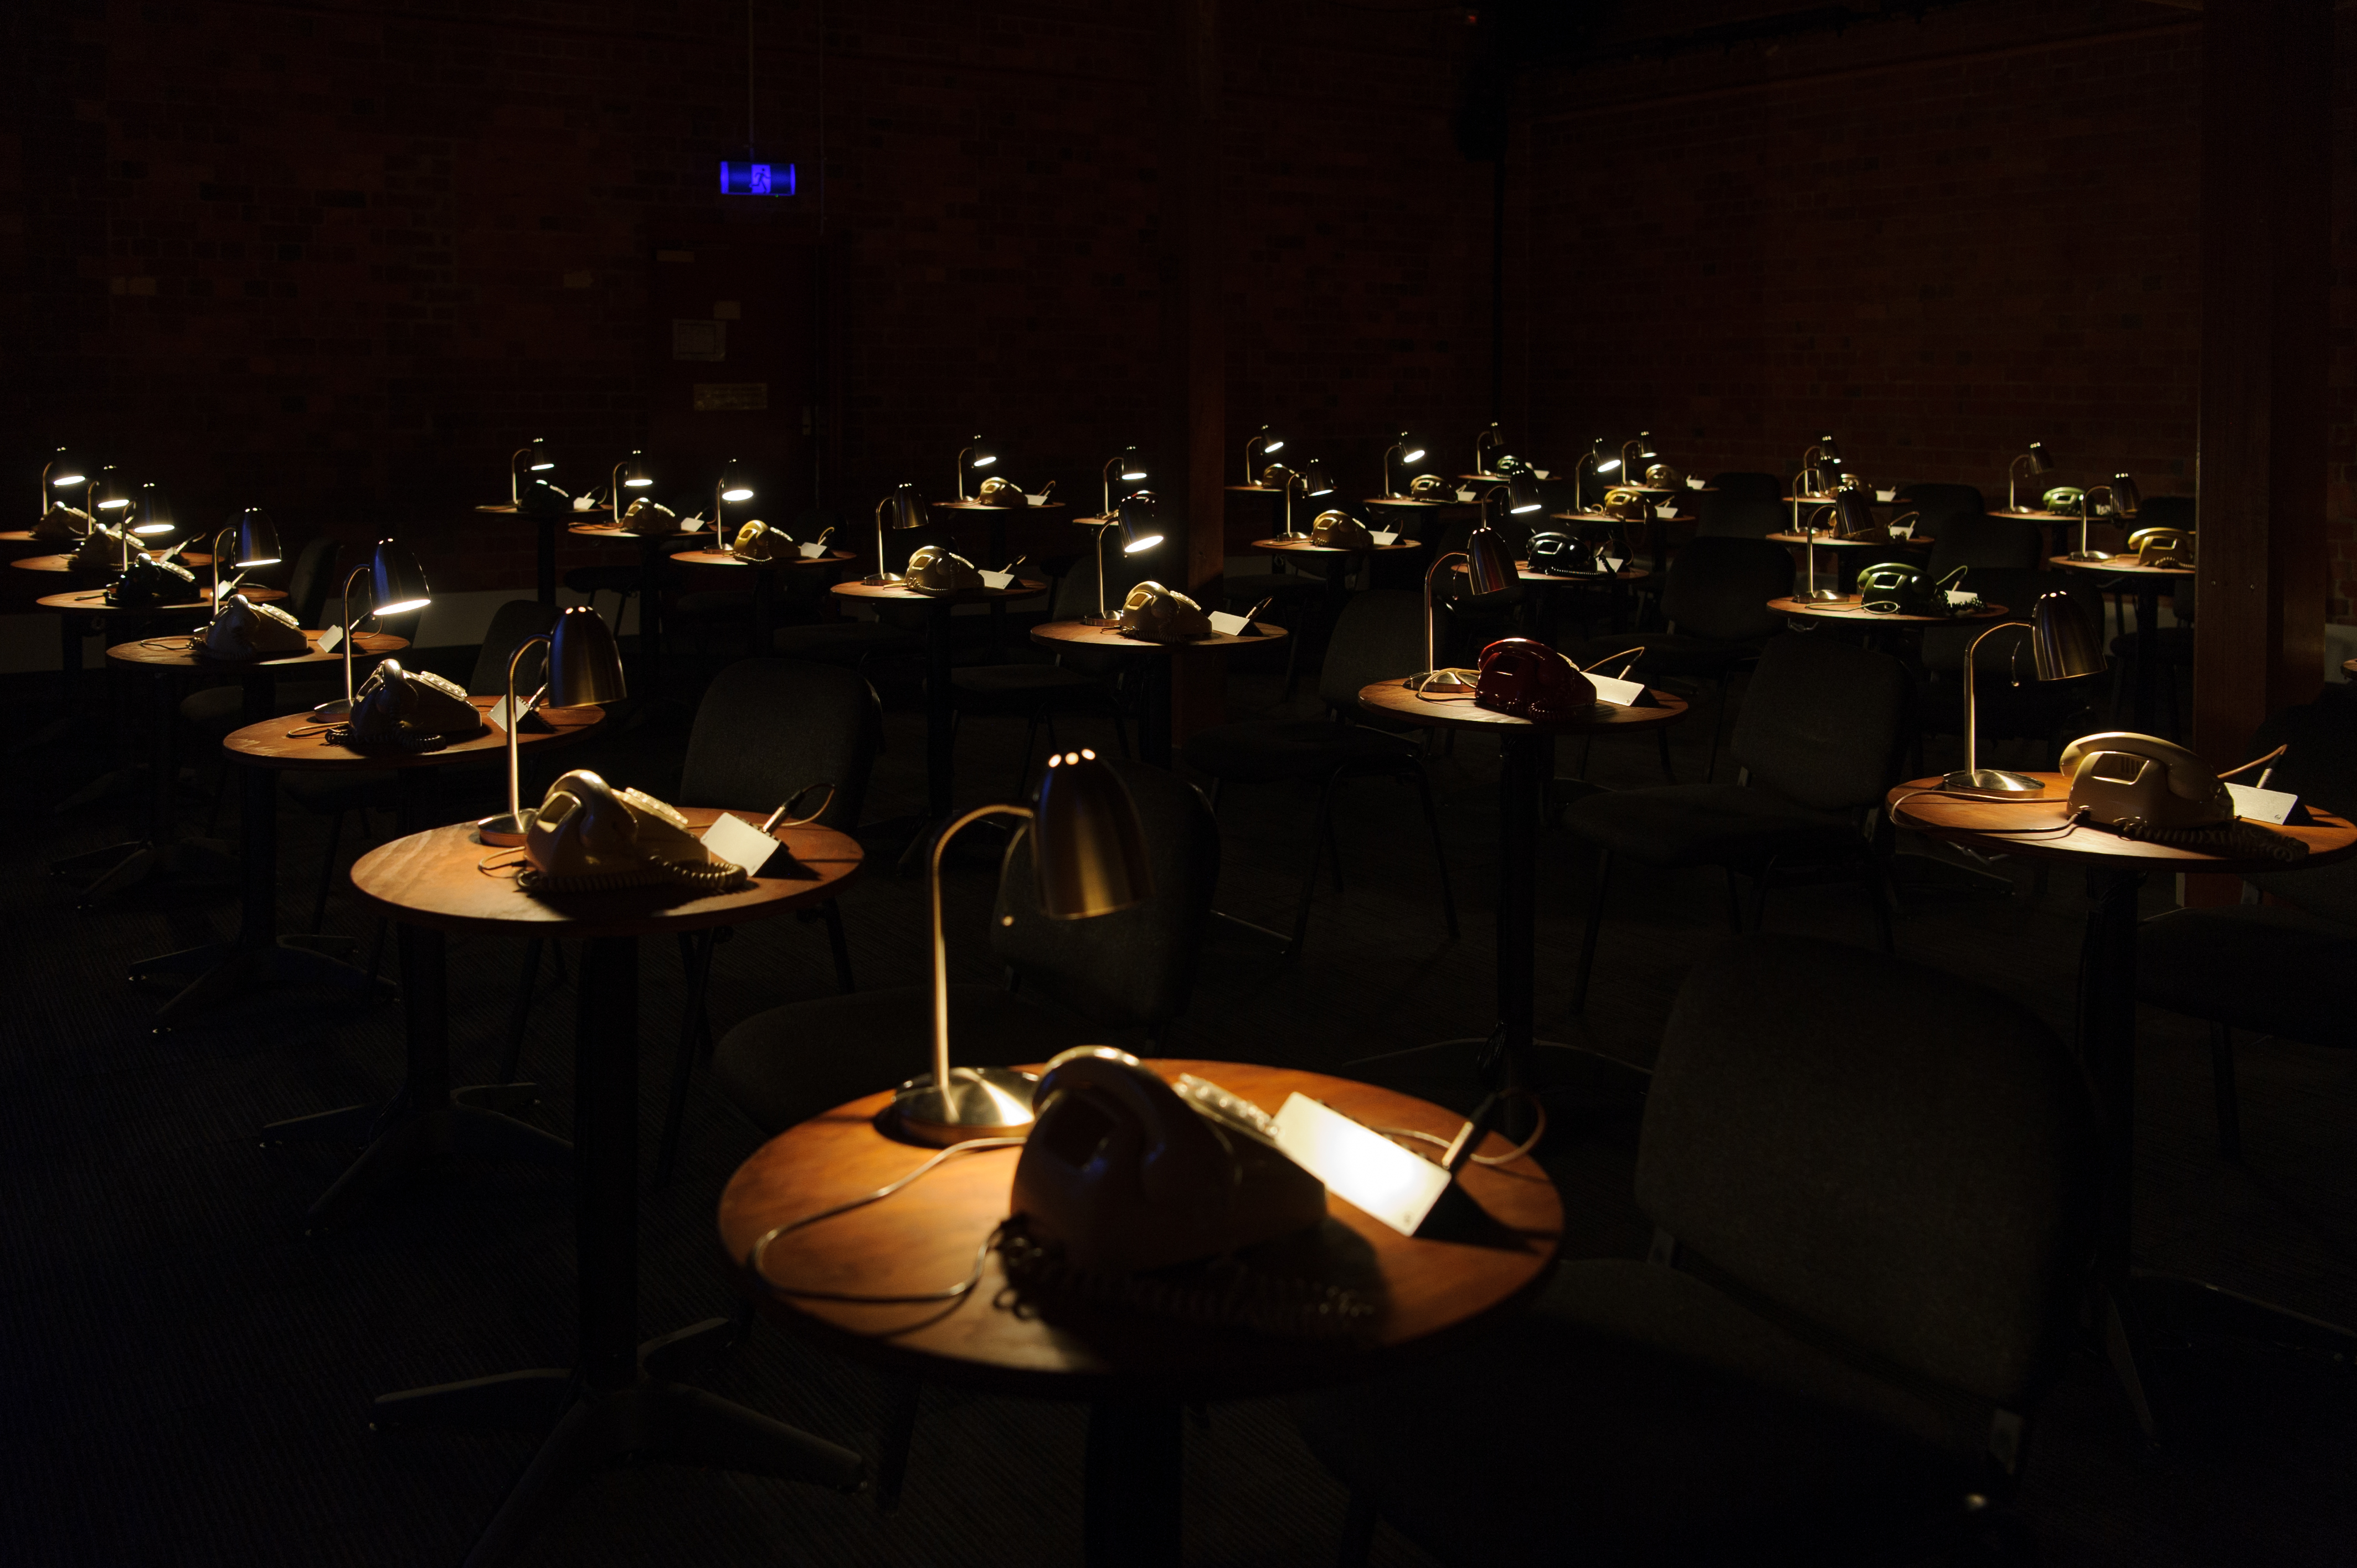 Rows of round desks are pictured in a dark room. On each a rotary dial telephone and a desk lamp.